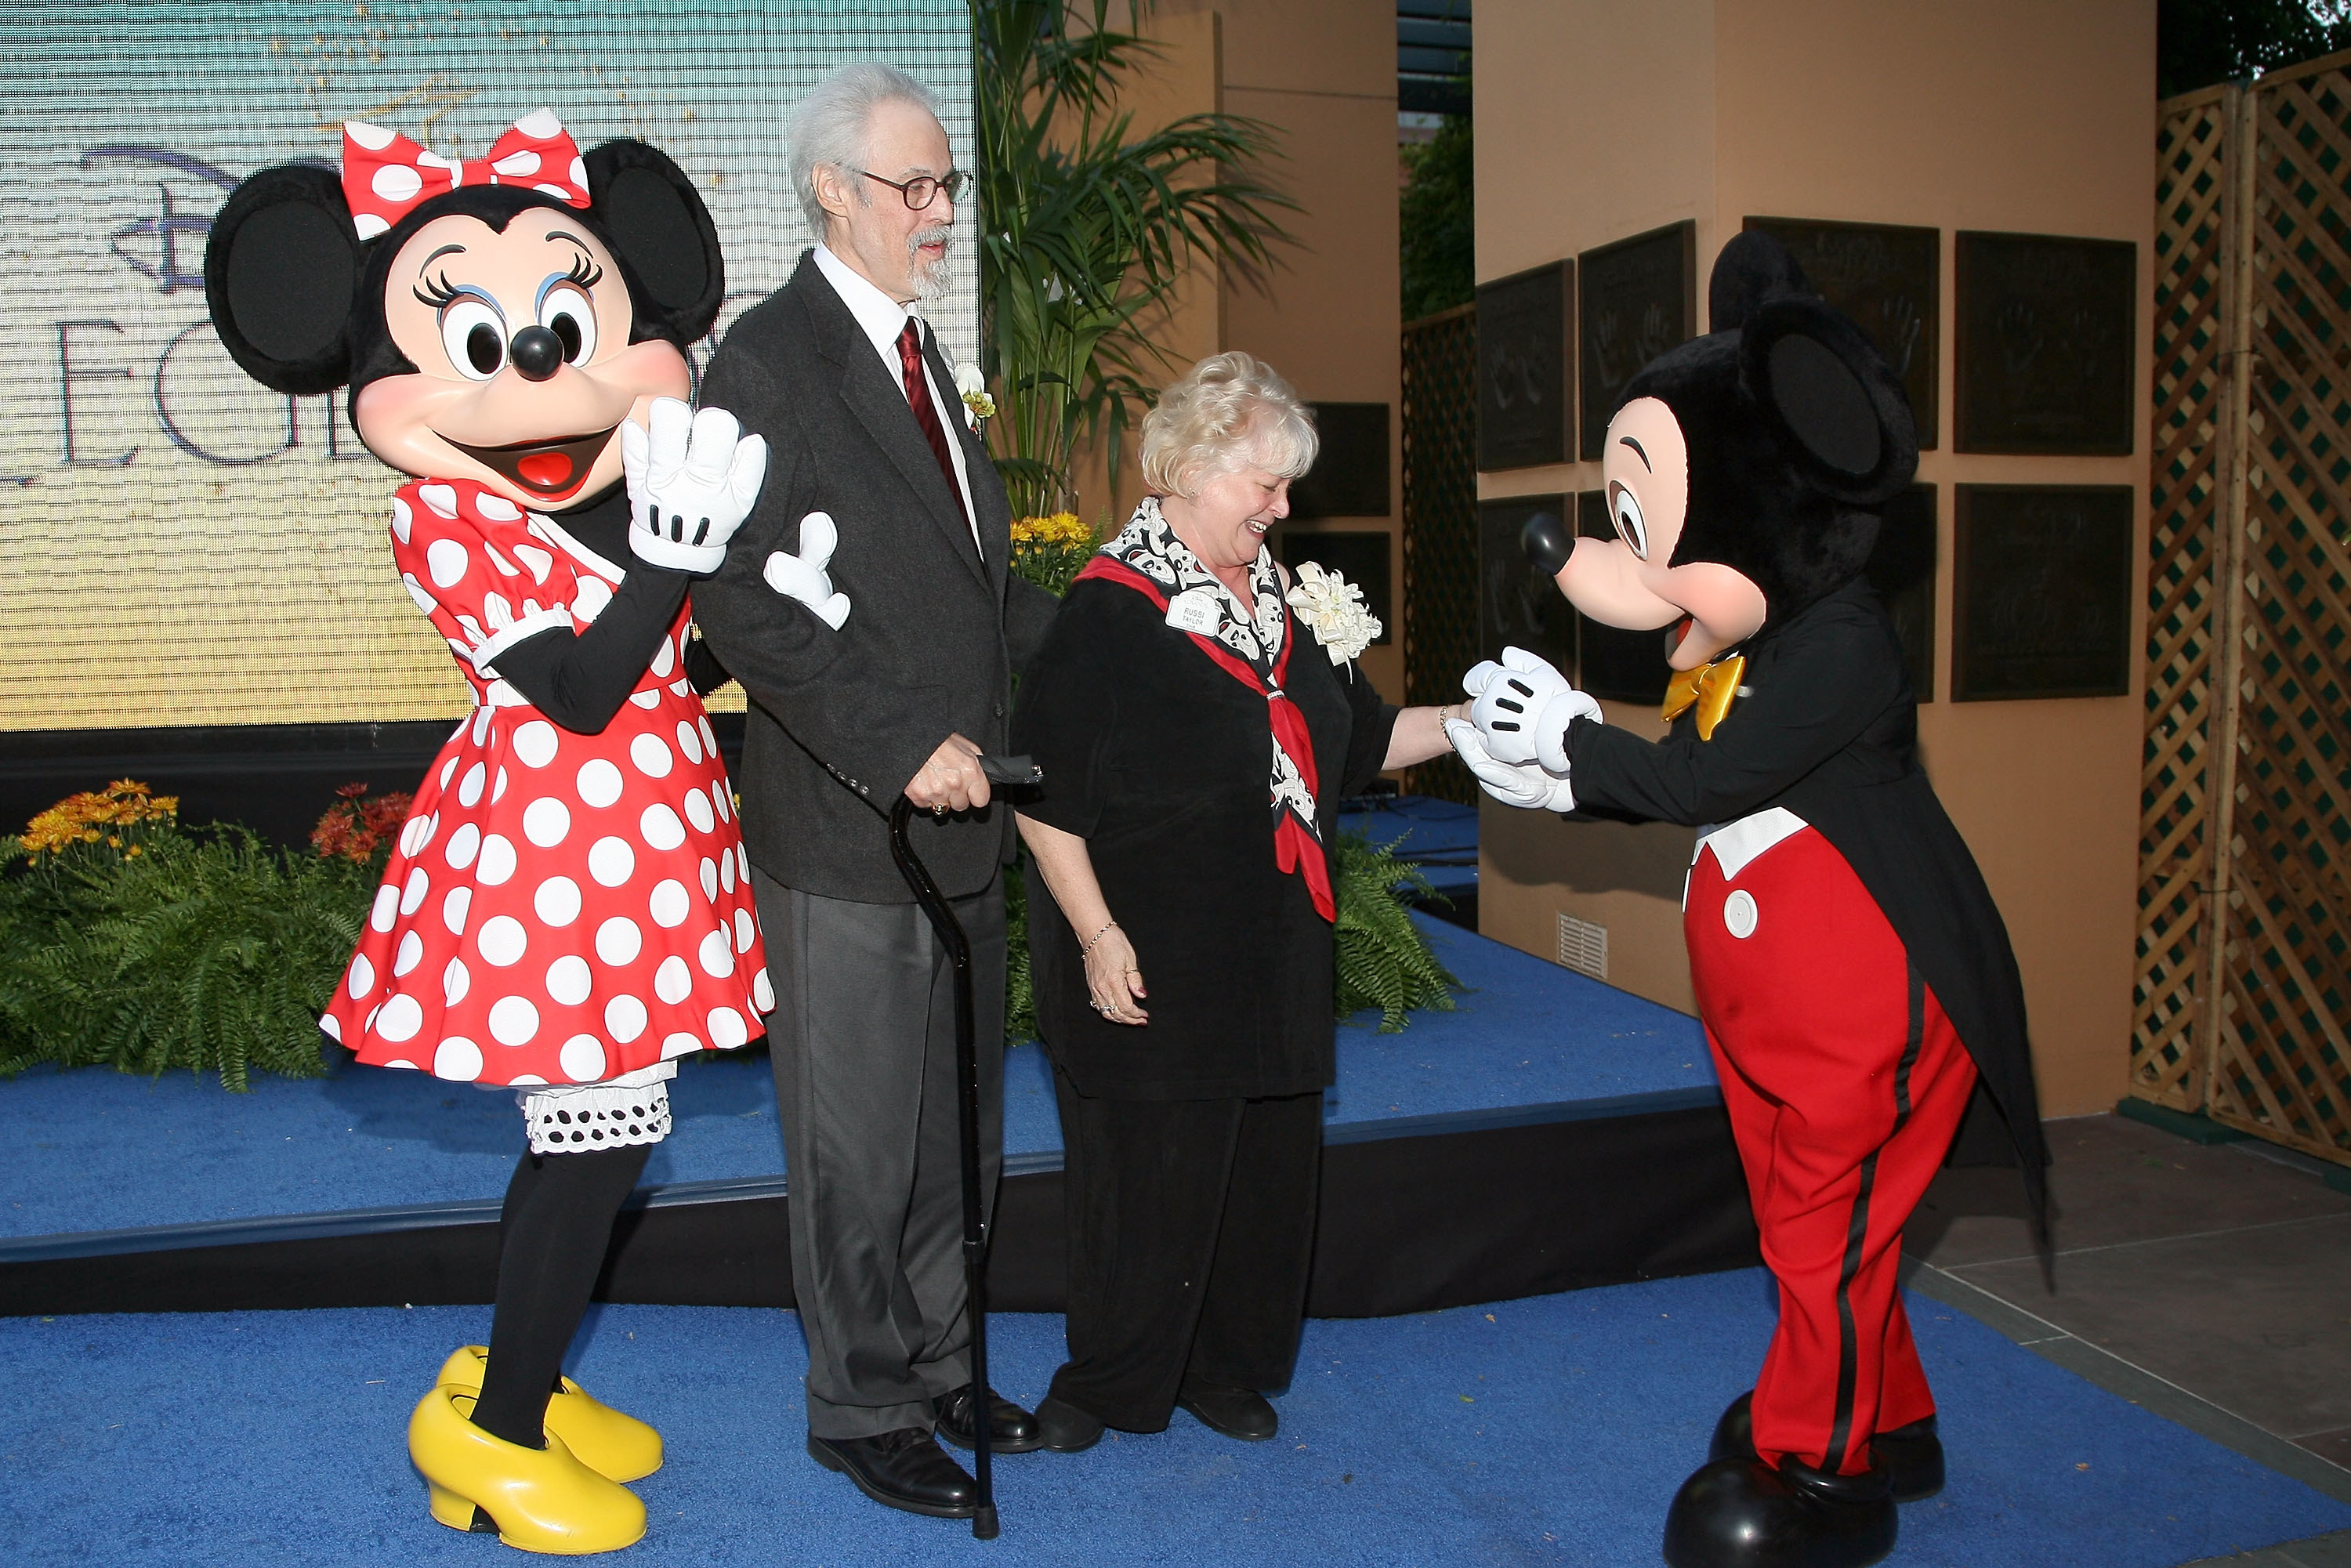 Mickey and Minnie Mouse with their voice actors